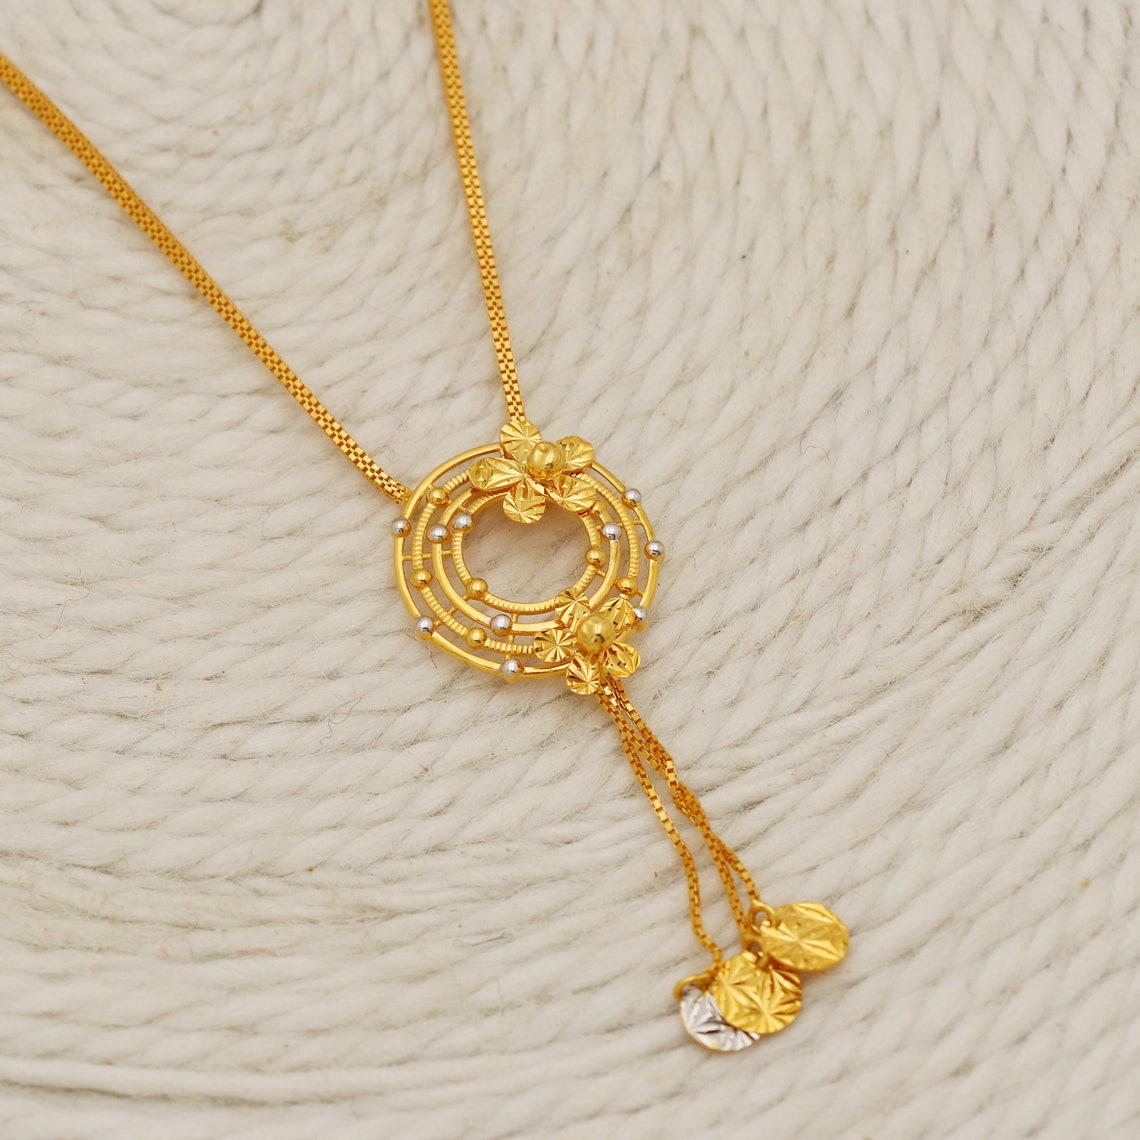 22k Gold Chain Necklace Chain, Fine Gold Handmade Women Jewelry, Indian ...